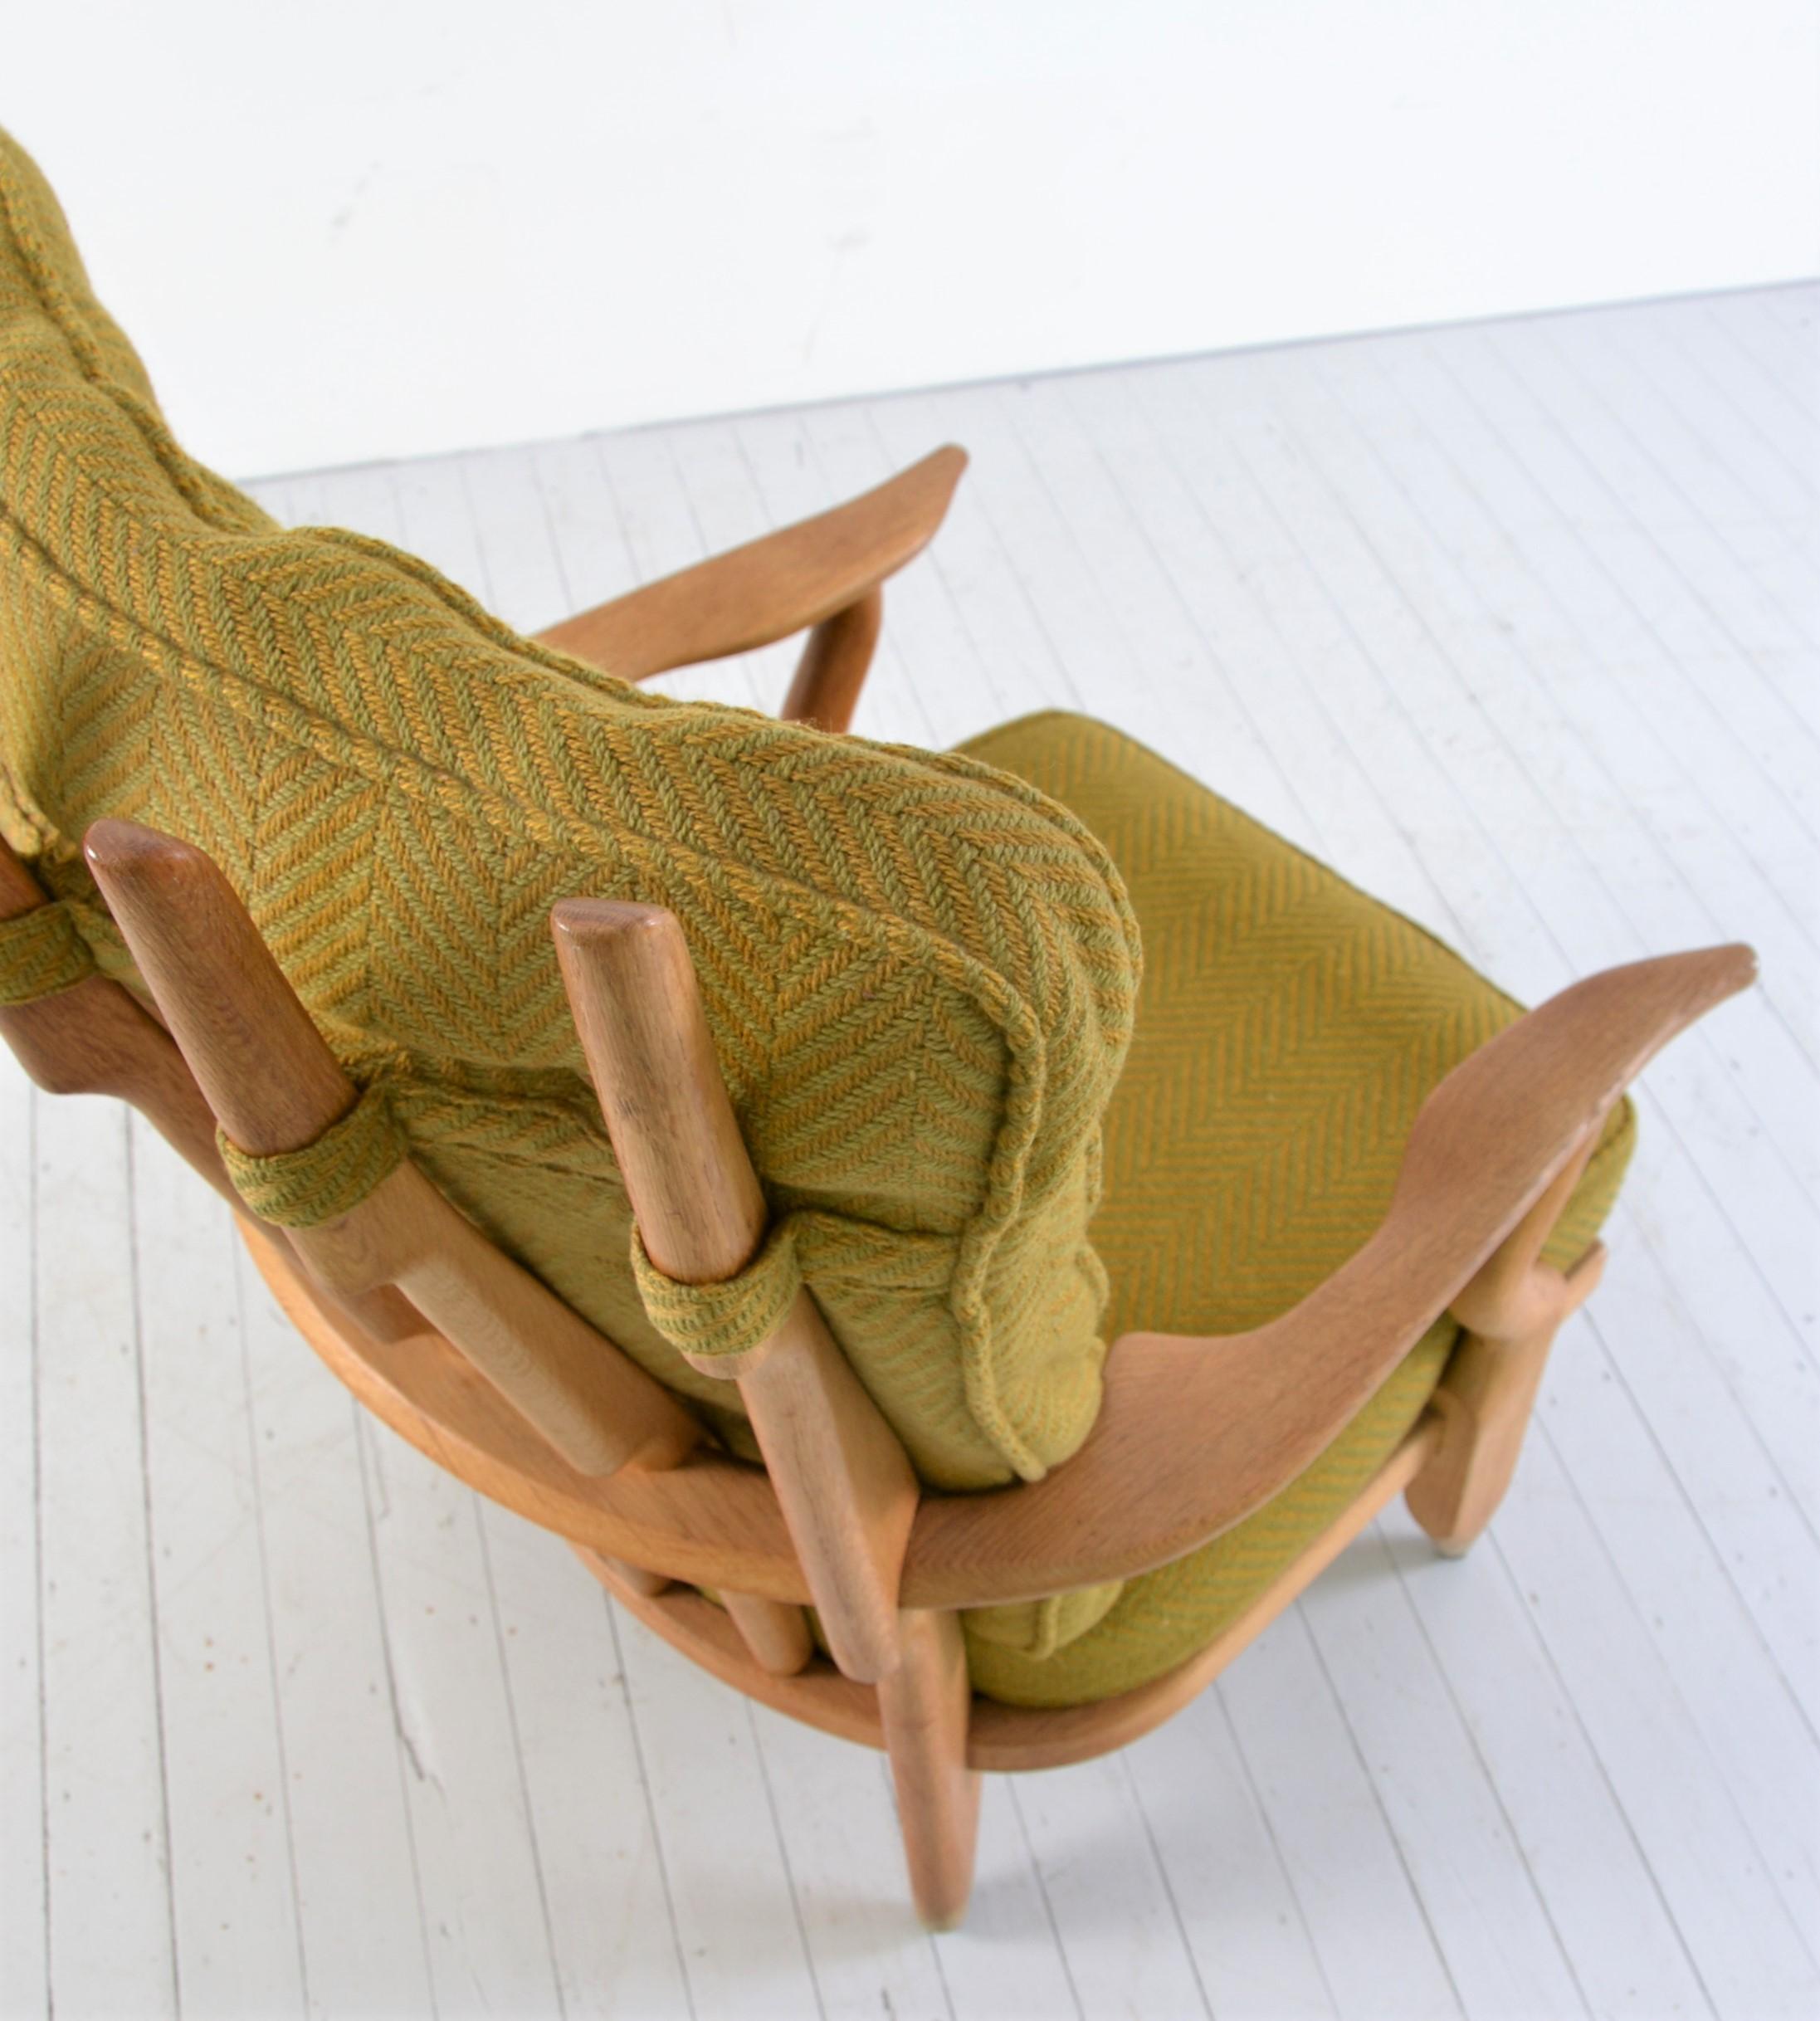 Guillerme et Chambron for Votre Maison, lounge chair model 'Grand Repos', oak, original fabric, France, 1960s.

Well-sculpted Guillerme and Chambron 'Grand Repos' lounge chair in solid oak with the typical characteristic decorative details at the